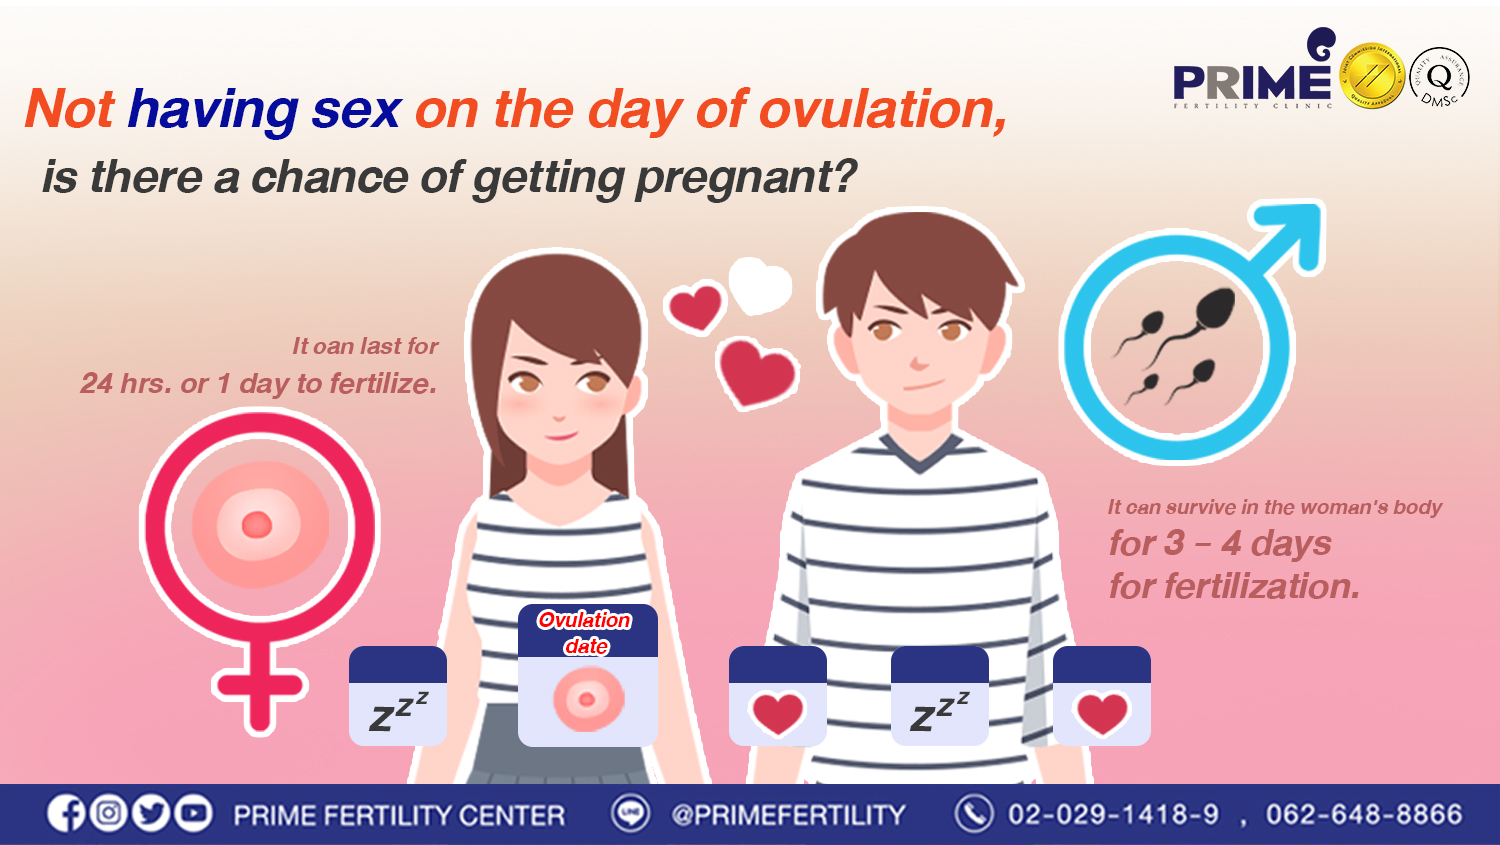 Not having sex on the day of ovulation, is there a chance of getting pregnant?